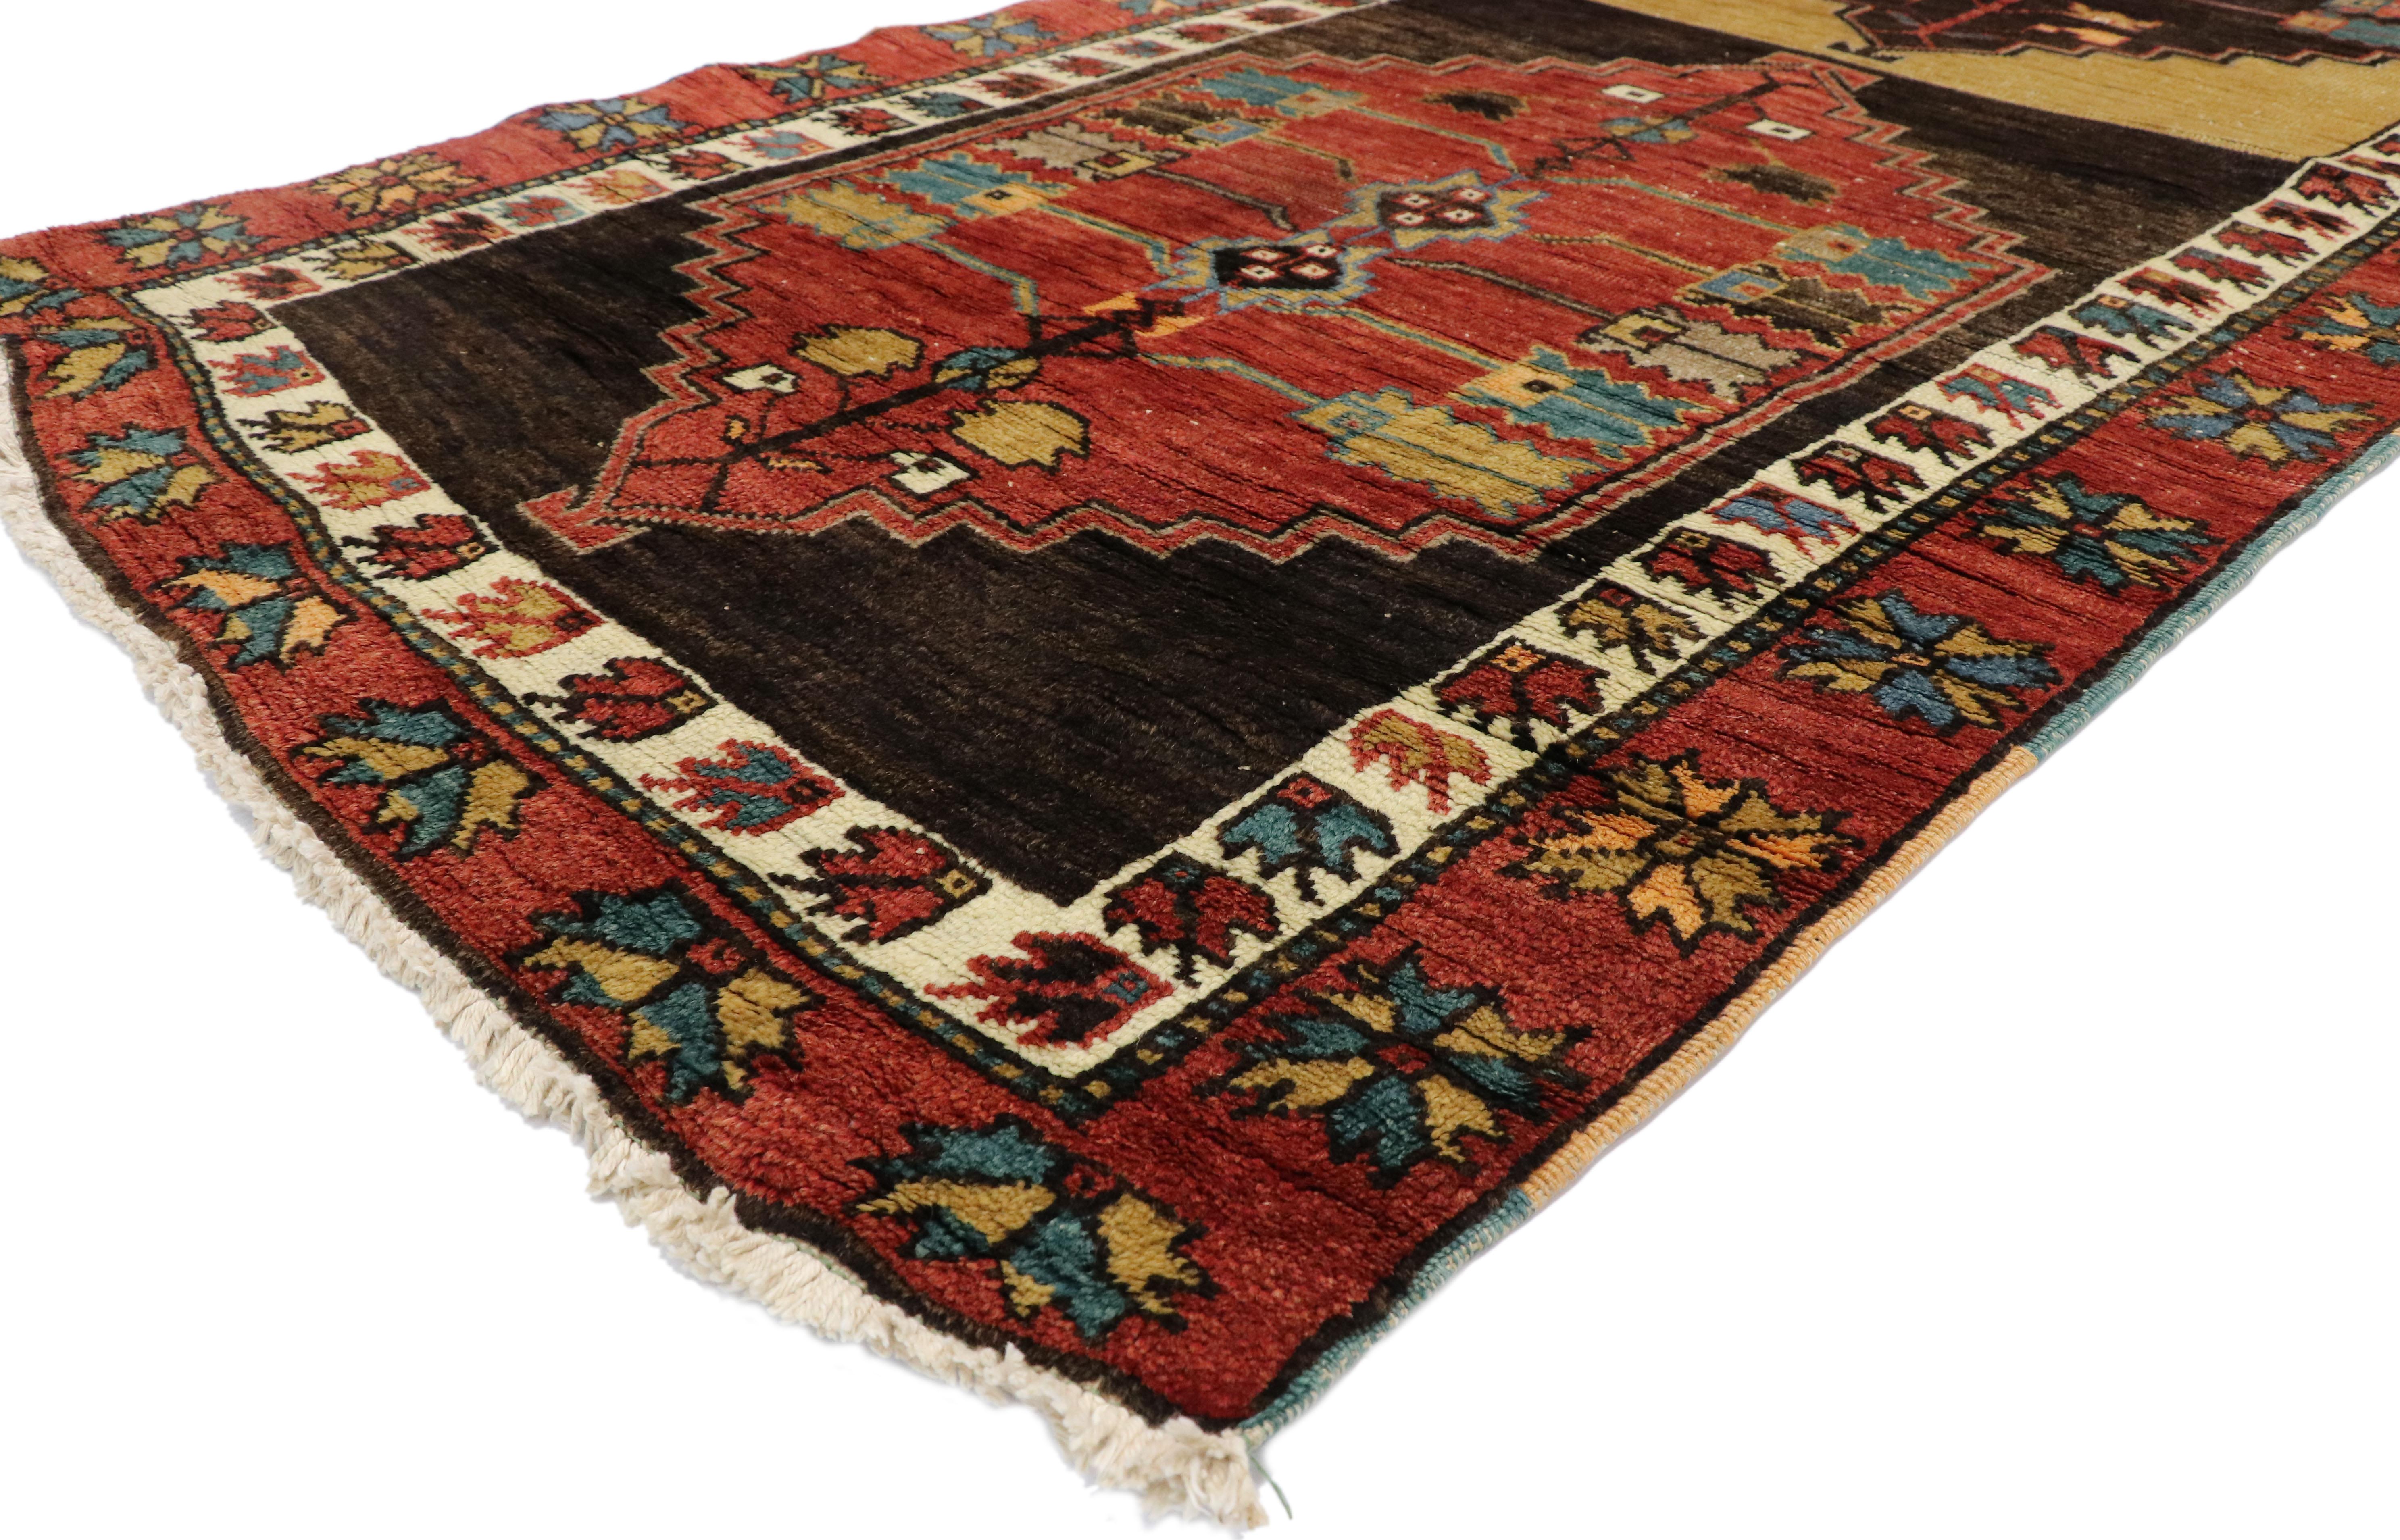 52146, vintage Turkish Oushak runner with Mid-Century Modern Tribal. This hand knotted wool vintage Turkish Oushak runner with Modern Tribal style features three hexagonal medallions with serrated edges in an abrash field surrounded by a geometric